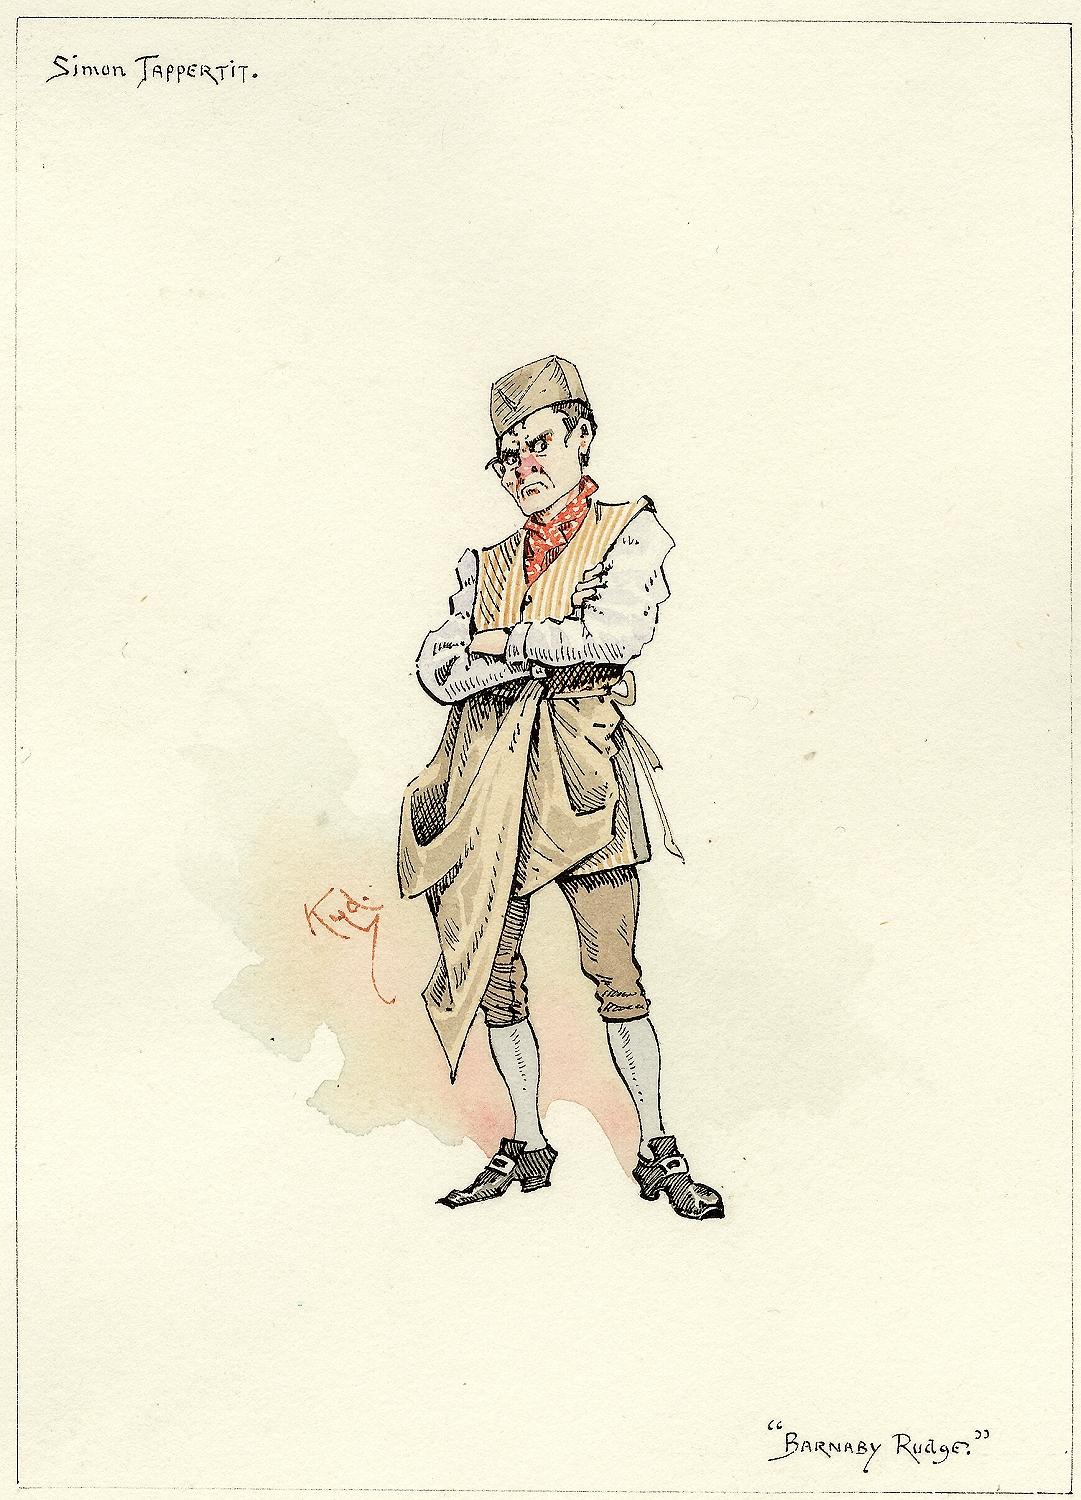 AUTHOR: CLARKE, Joseph Clayton (KYD) (Charles Dickens). 

TITLE: Simon Tappertit (from Barnaby Rudge)

PUBLISHER: England, [c. 1920]

DESCRIPTION: ORIGINAL INK AND WATERCOLOR SKETCH. 1 leaf, on paper, image 5-15/16